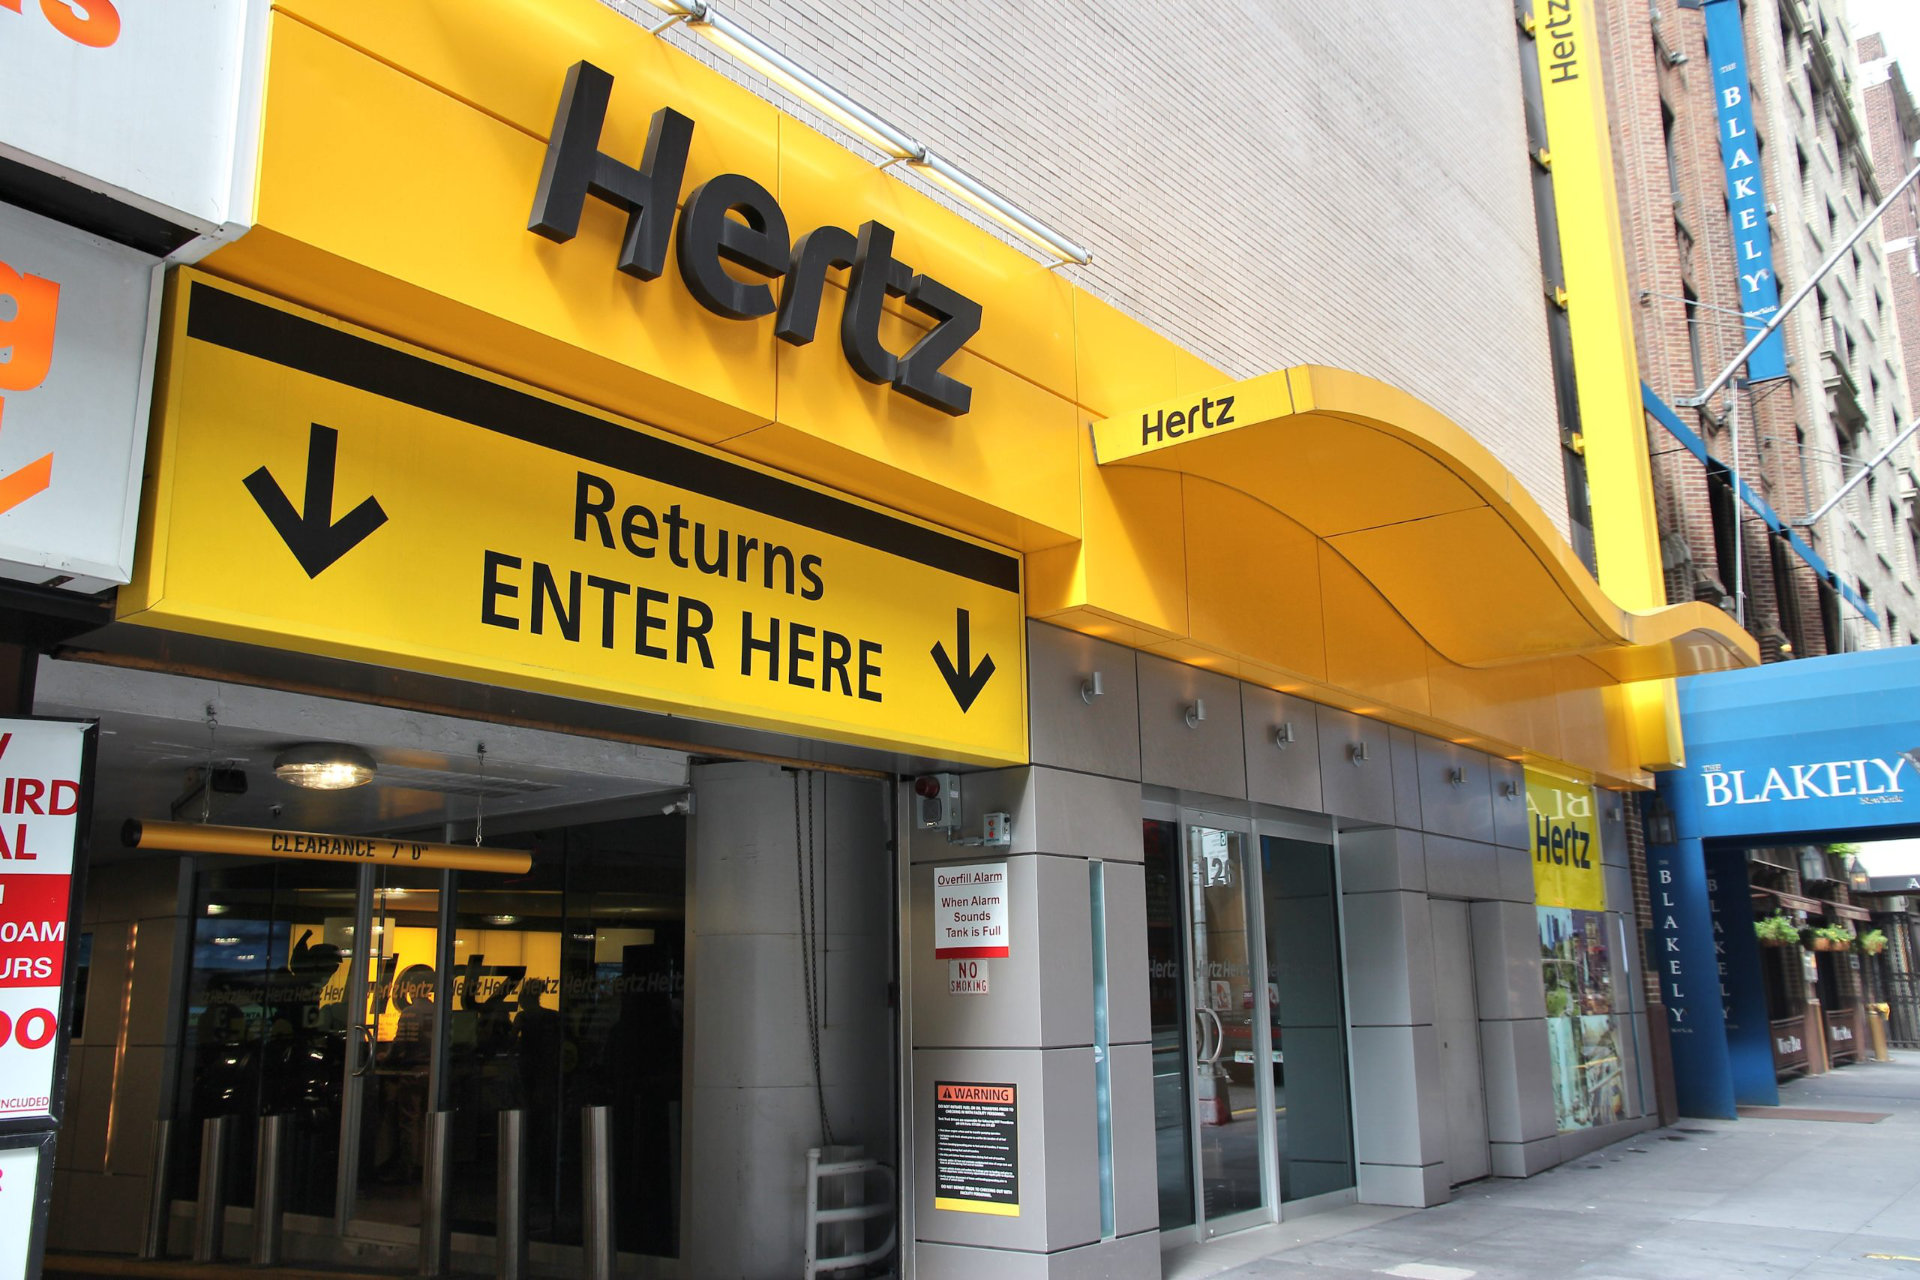 Hertz Exits Chapter 11 Bankruptcy As “A Much Stronger Company”